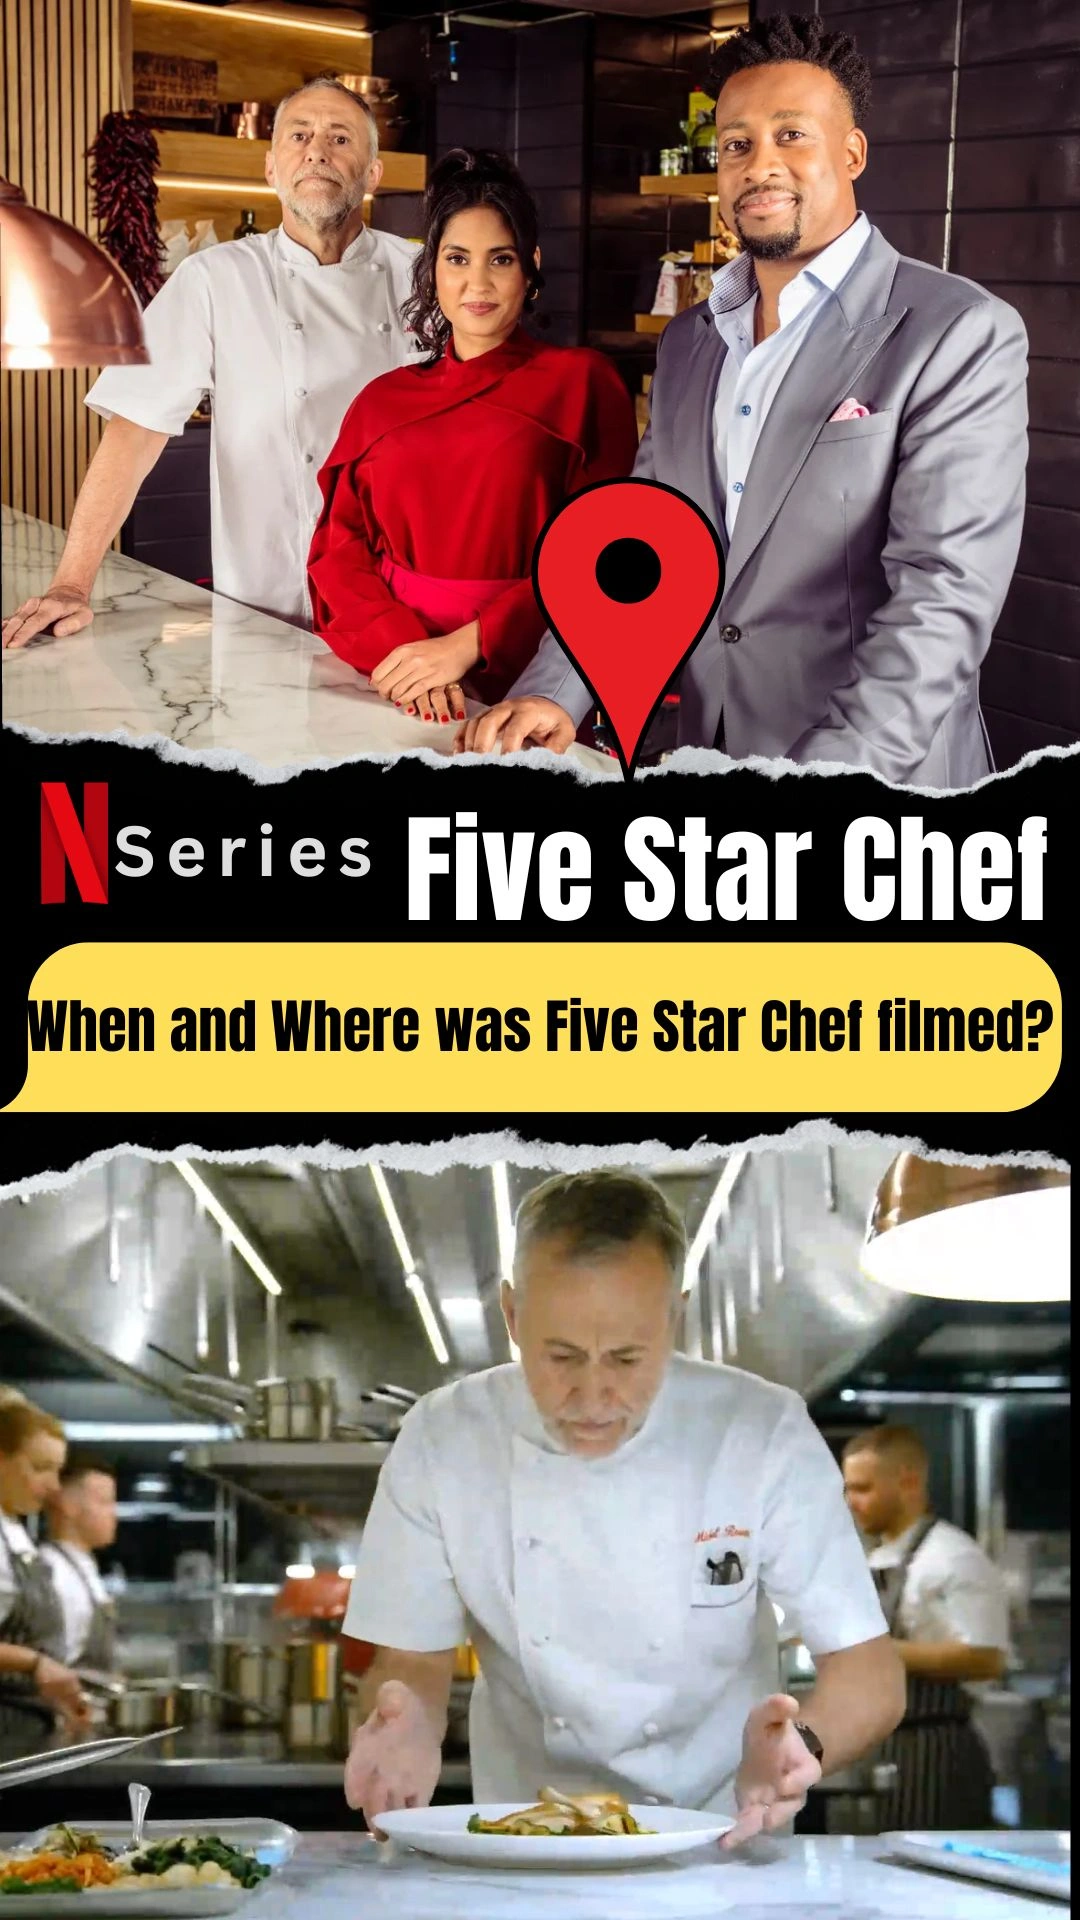 Five Star Chef Filming Locations